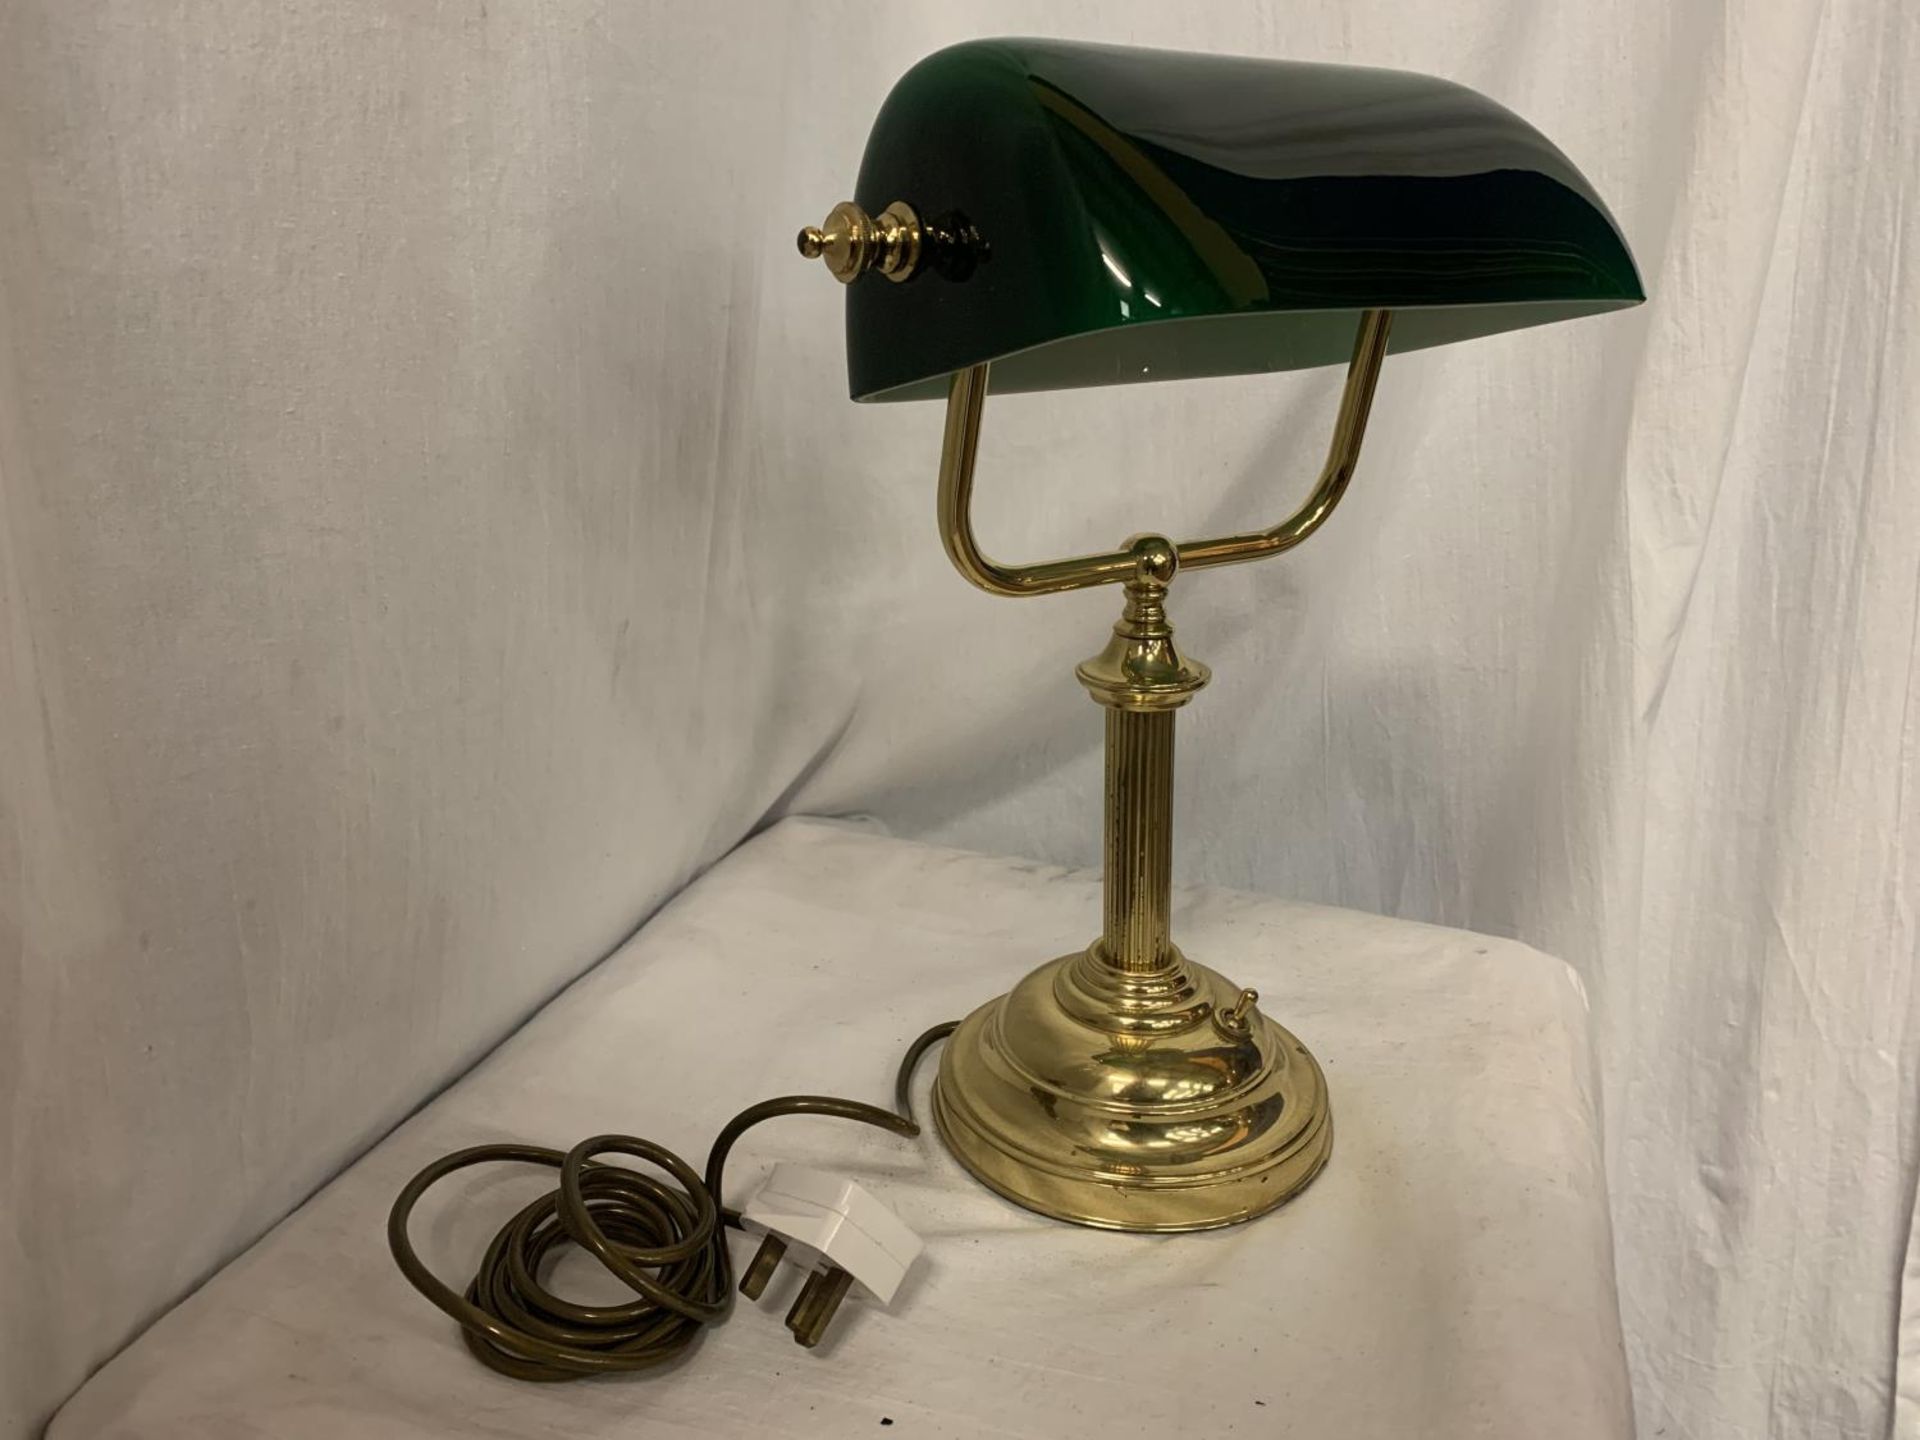 A BRASS BANKER'S DESK LAMP WITH GREEN GLASS SHADE - Image 2 of 4